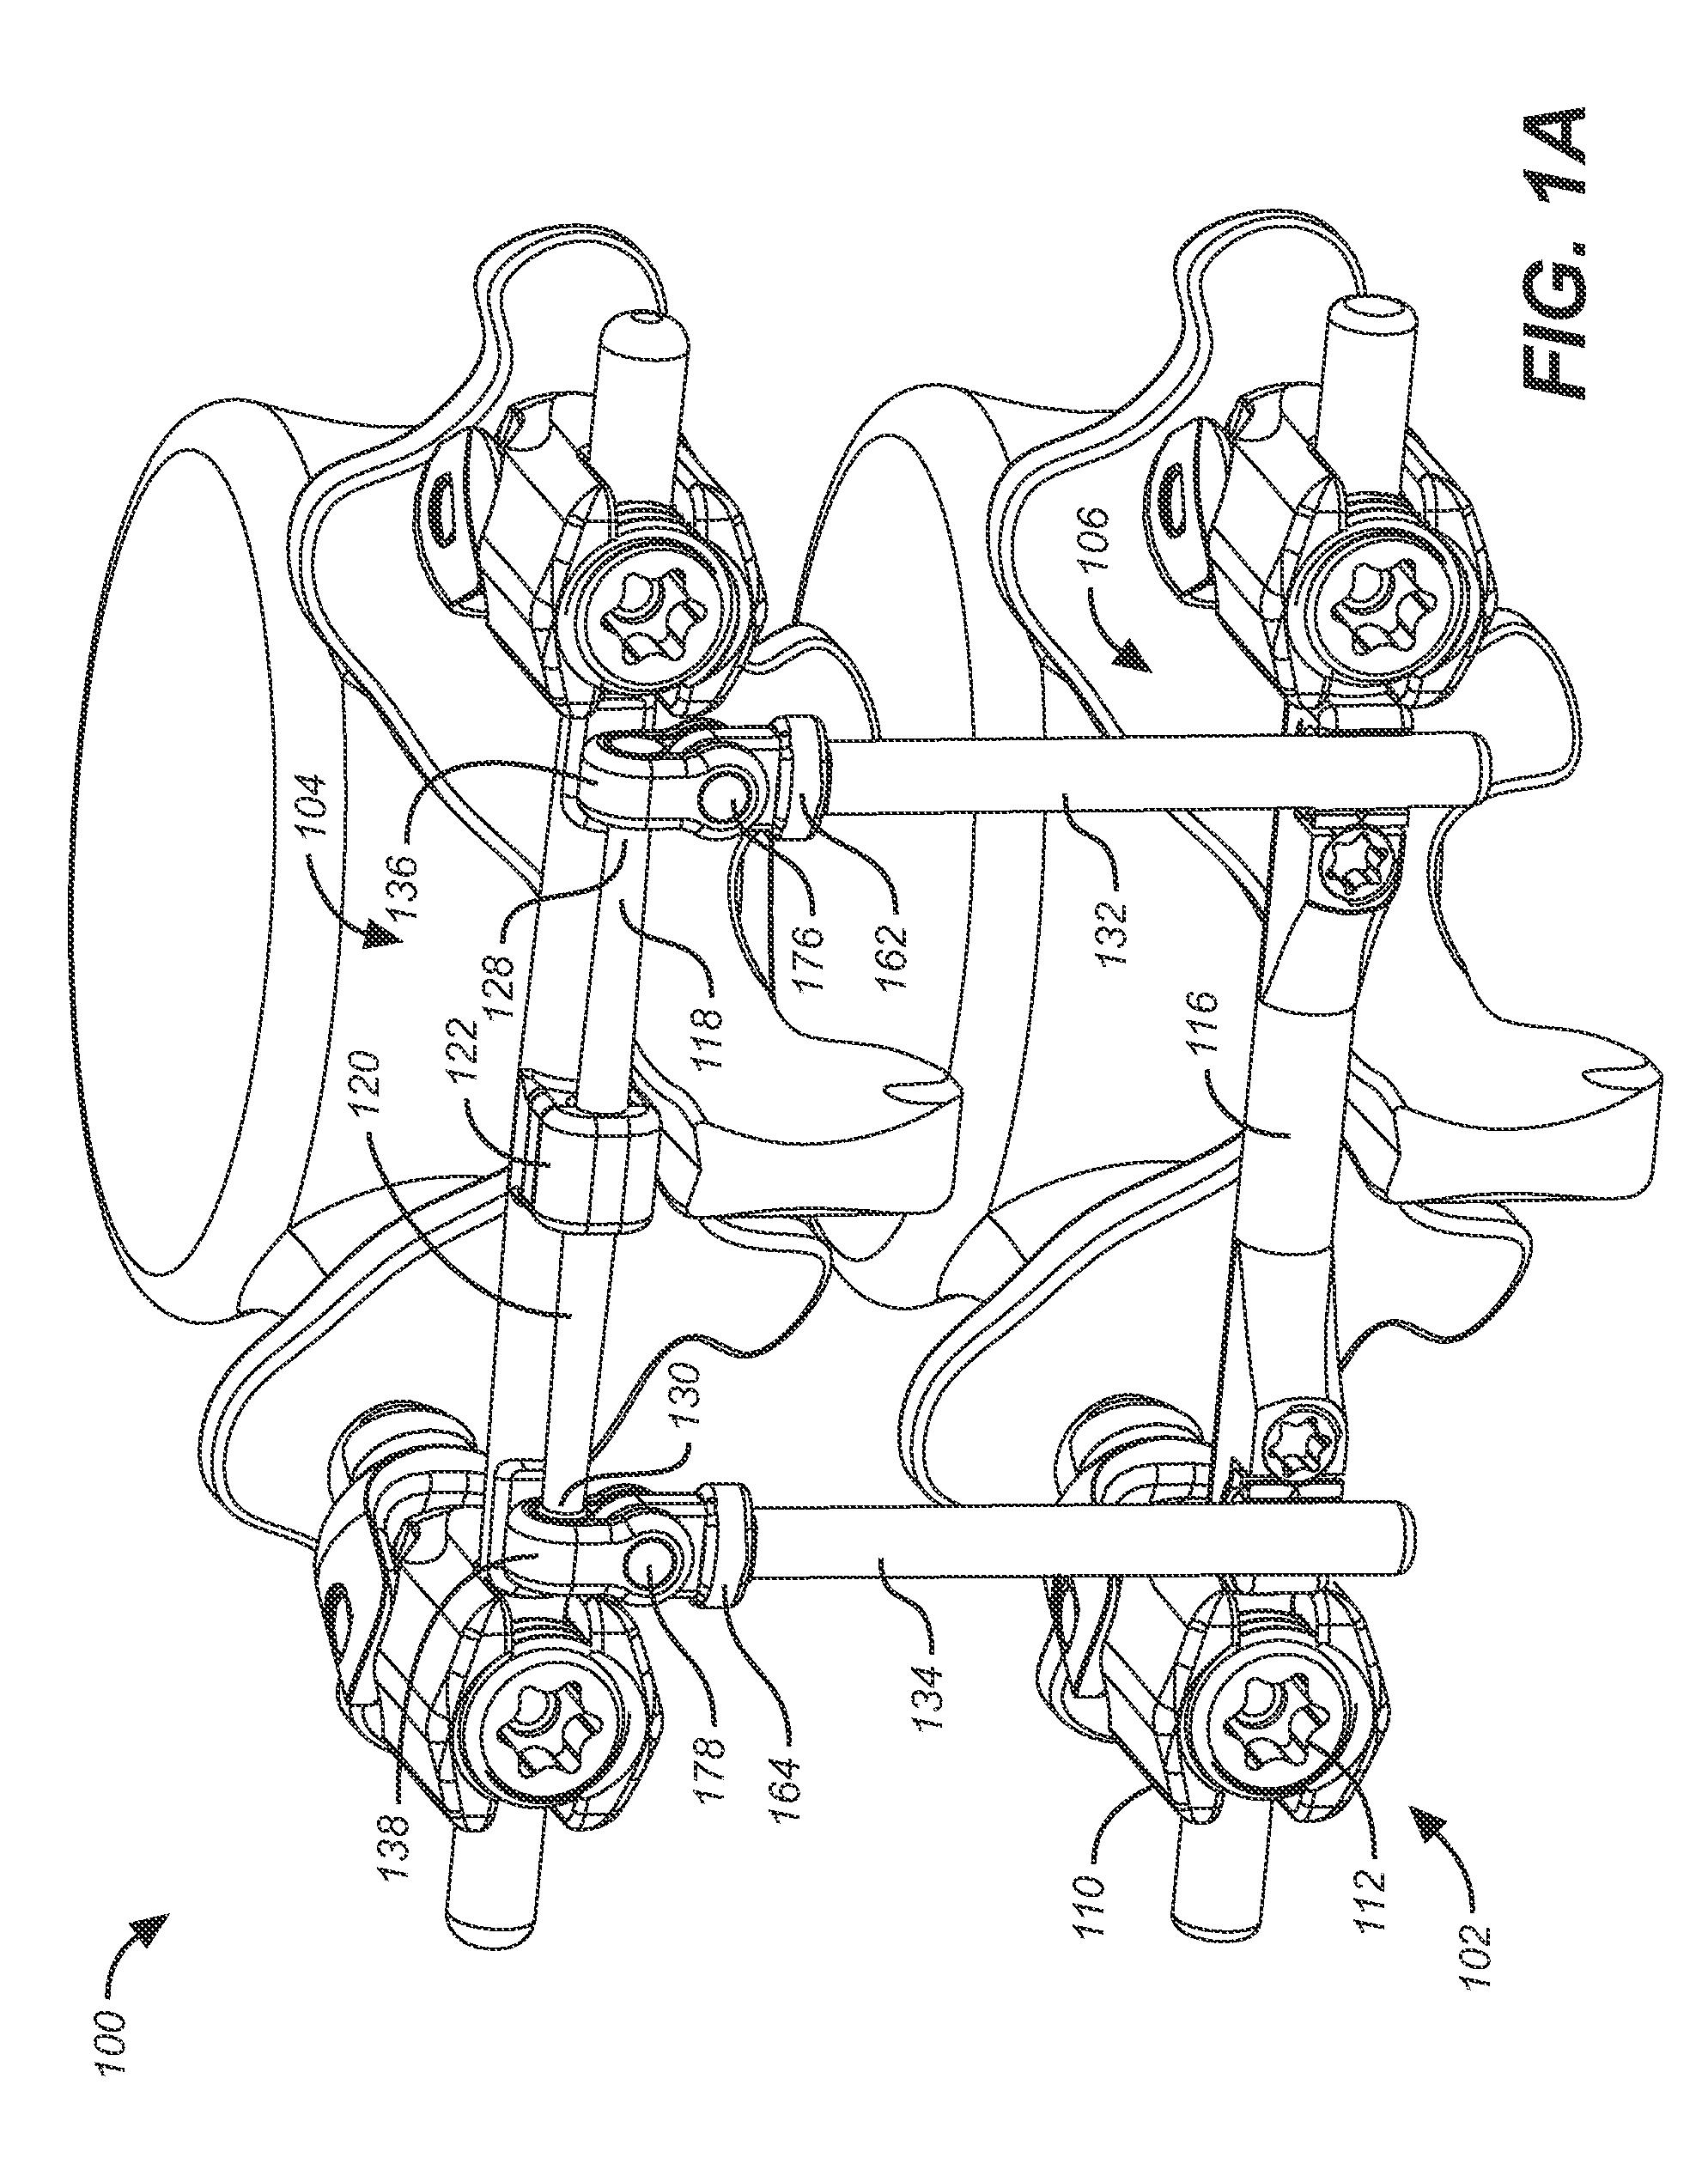 Reinforced bone anchor for a dynamic stabilization and motion preservation spinal implantation system and method